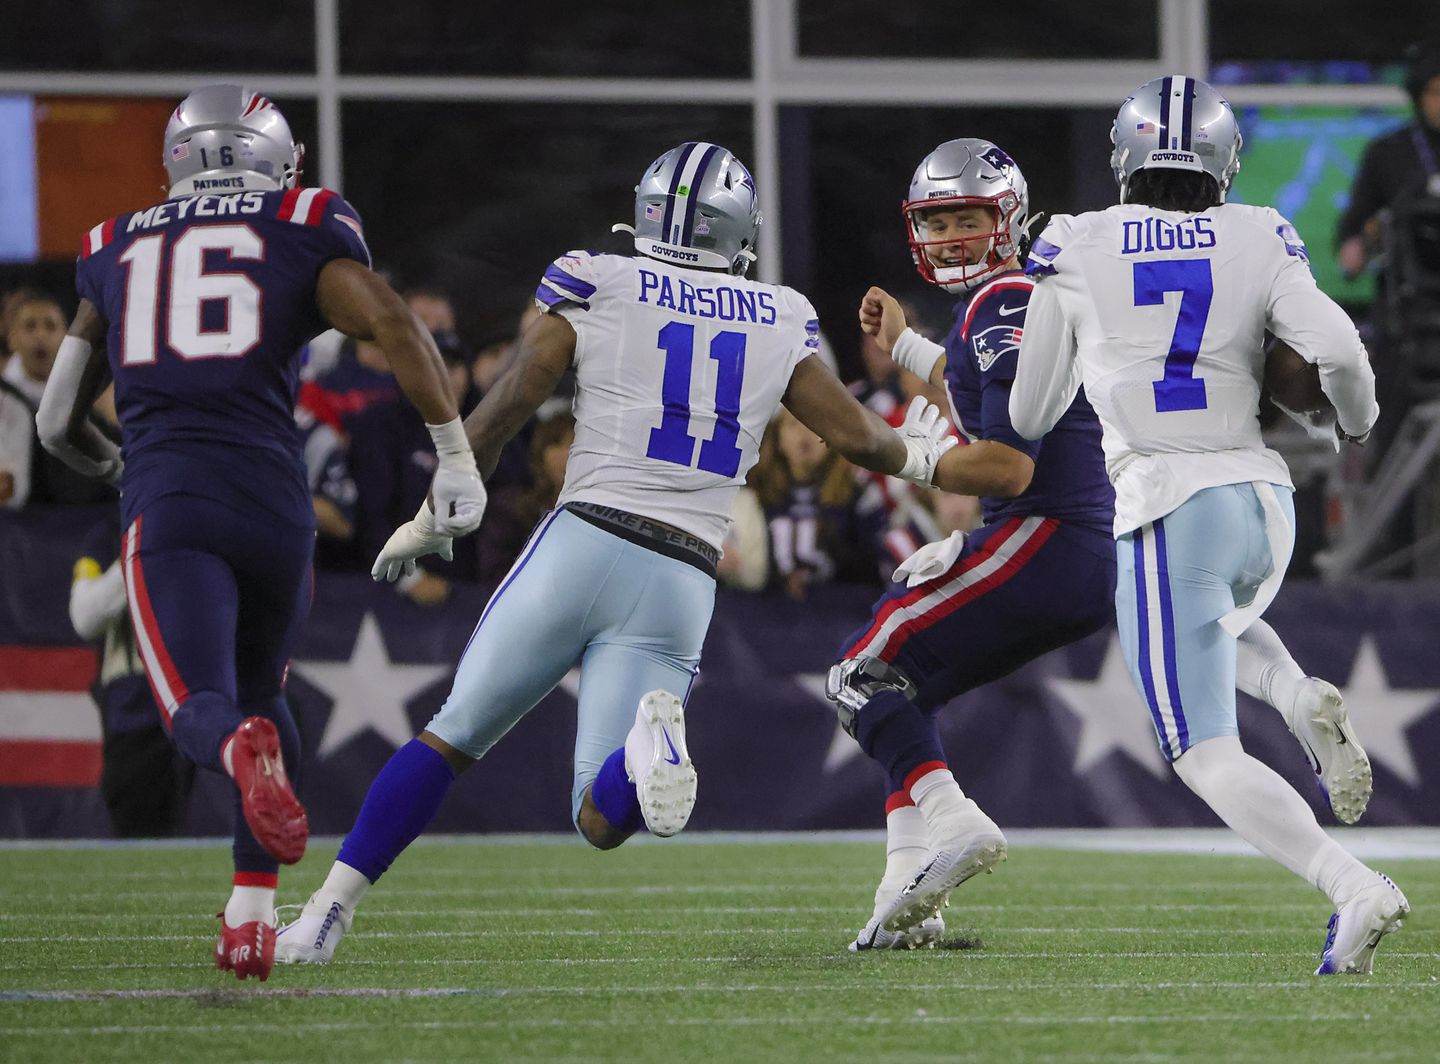 Sean's Scout: Timely Stops on Defense, Clutch Passing Game Earn Cowboys Win at Patriots